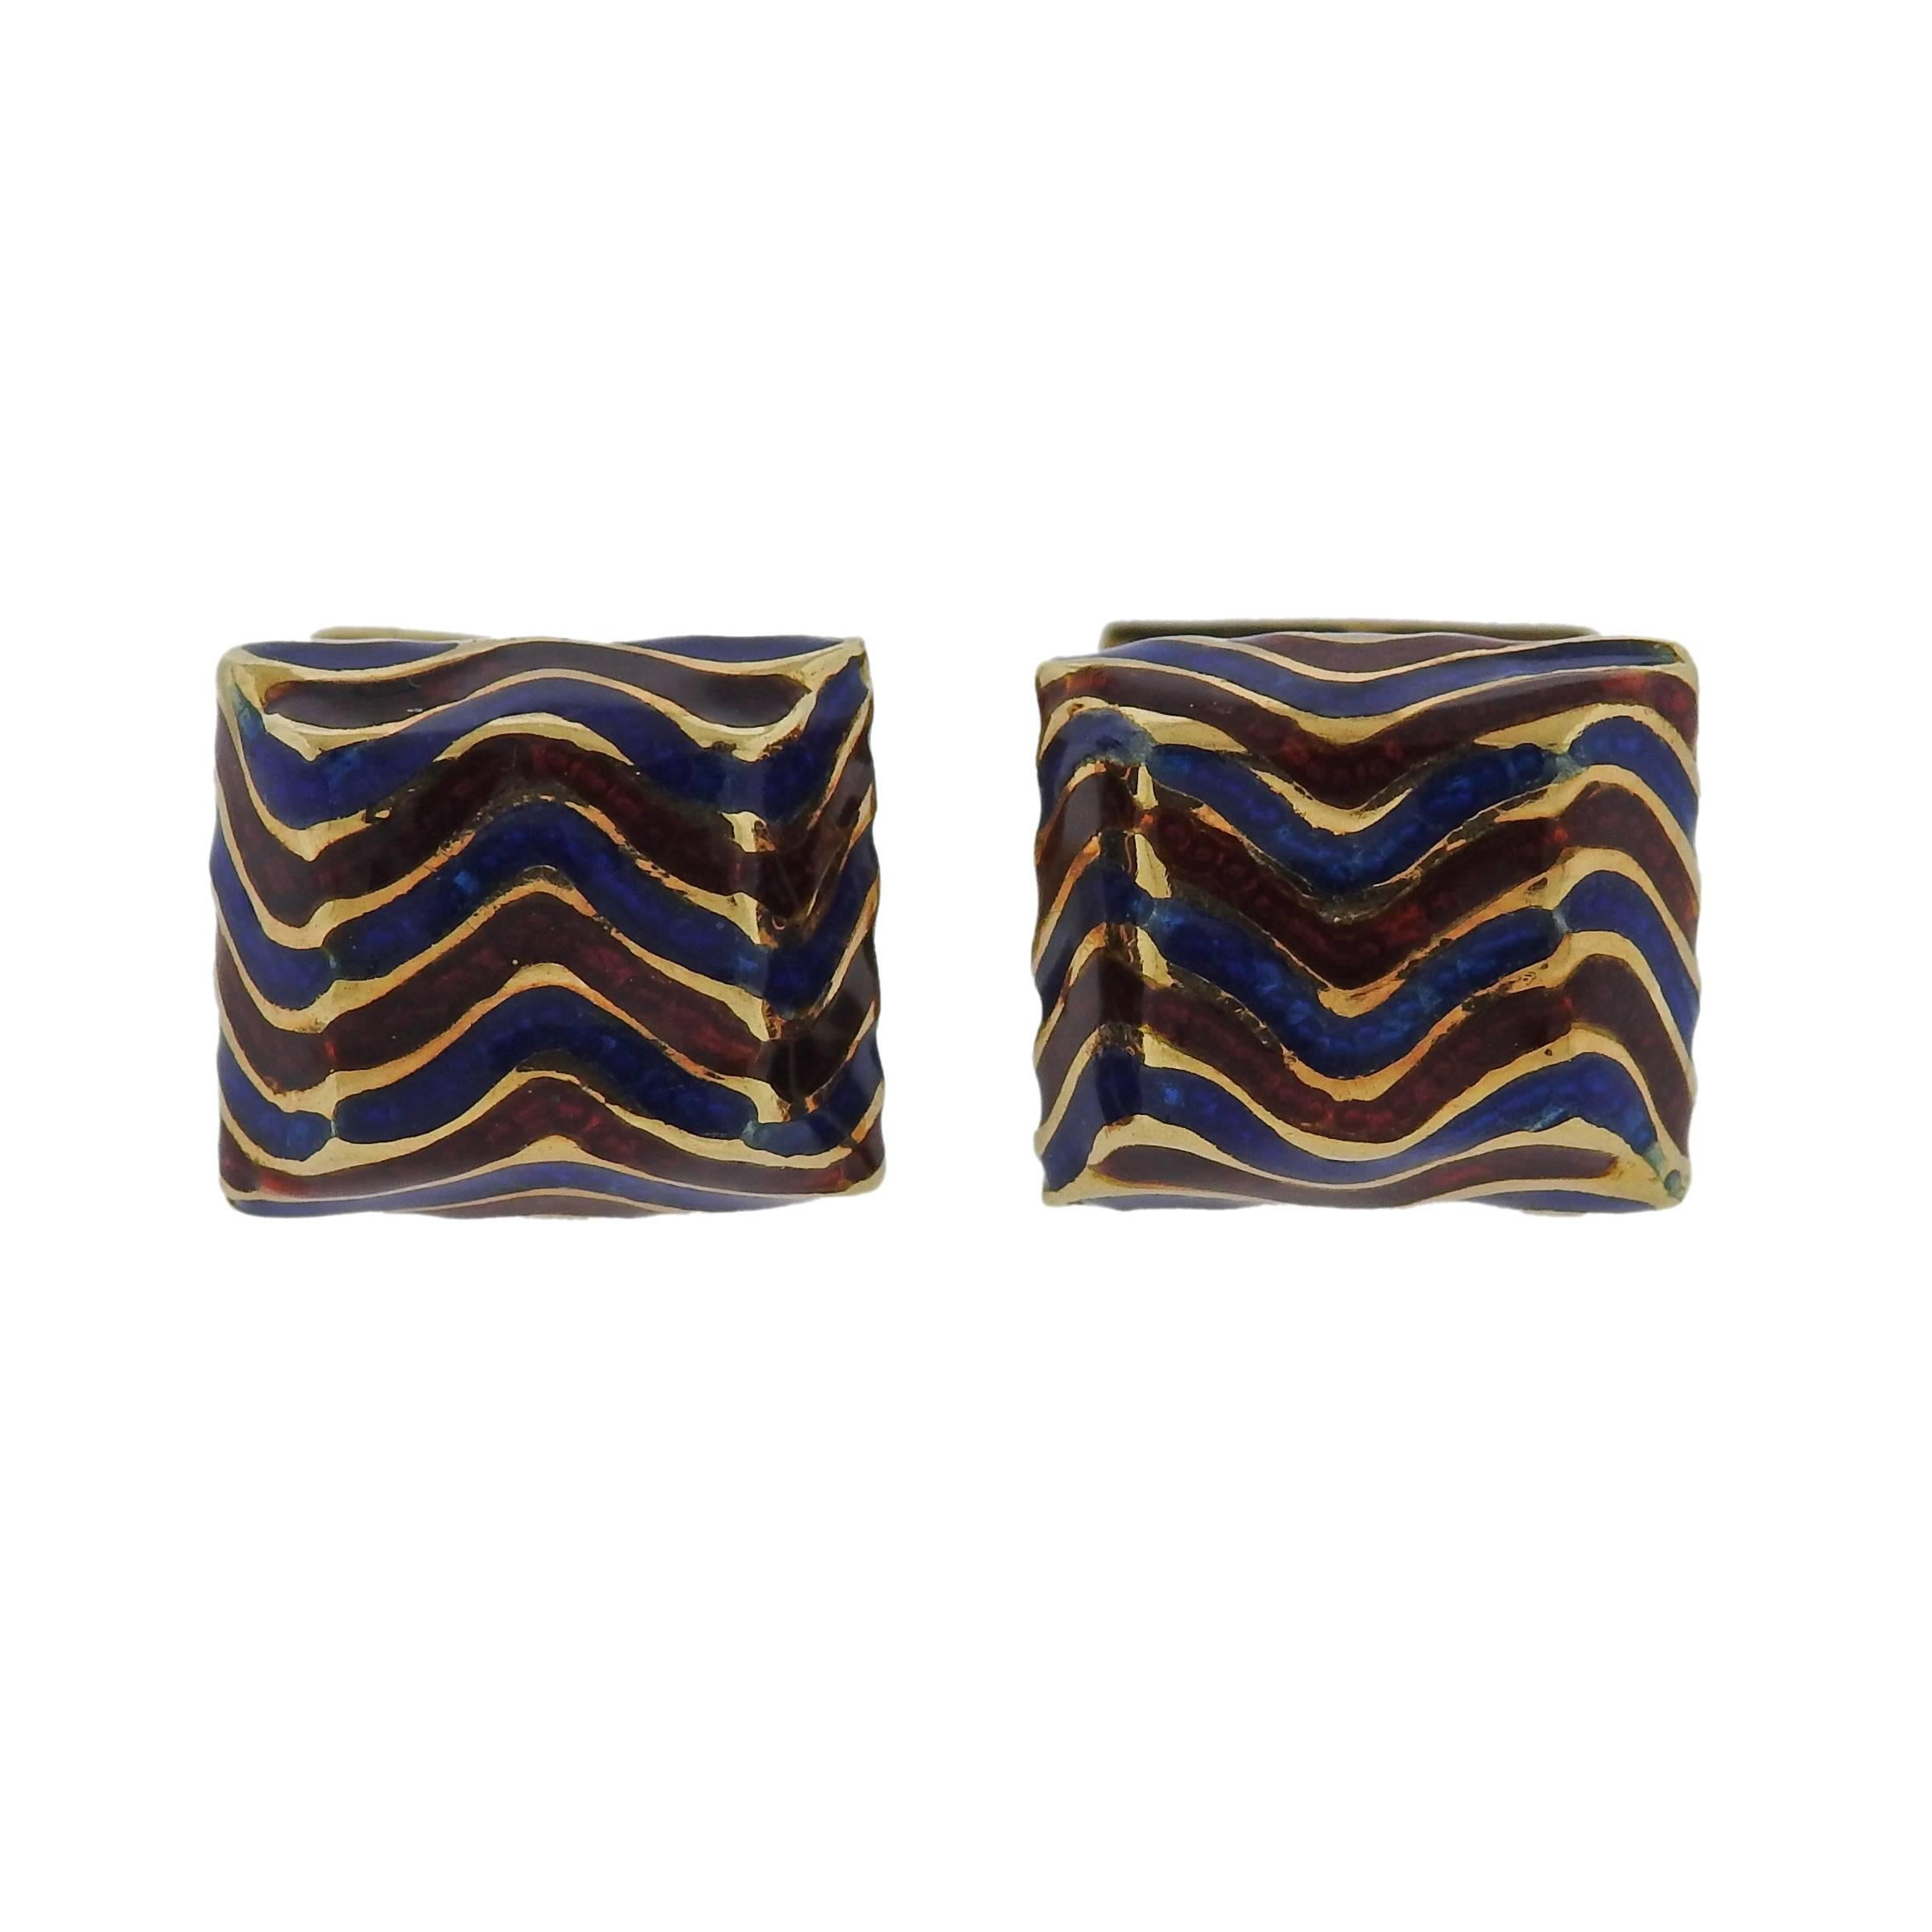 Pair of 18k gold cufflinks, crafted by David Webb, decorated with blue and red enamel wavy pattern design. Cufflink top measures 14mm x 12mm, back - 11.5mm x 10mm, weight - 15.1 grams. Marked: Webb, 18k